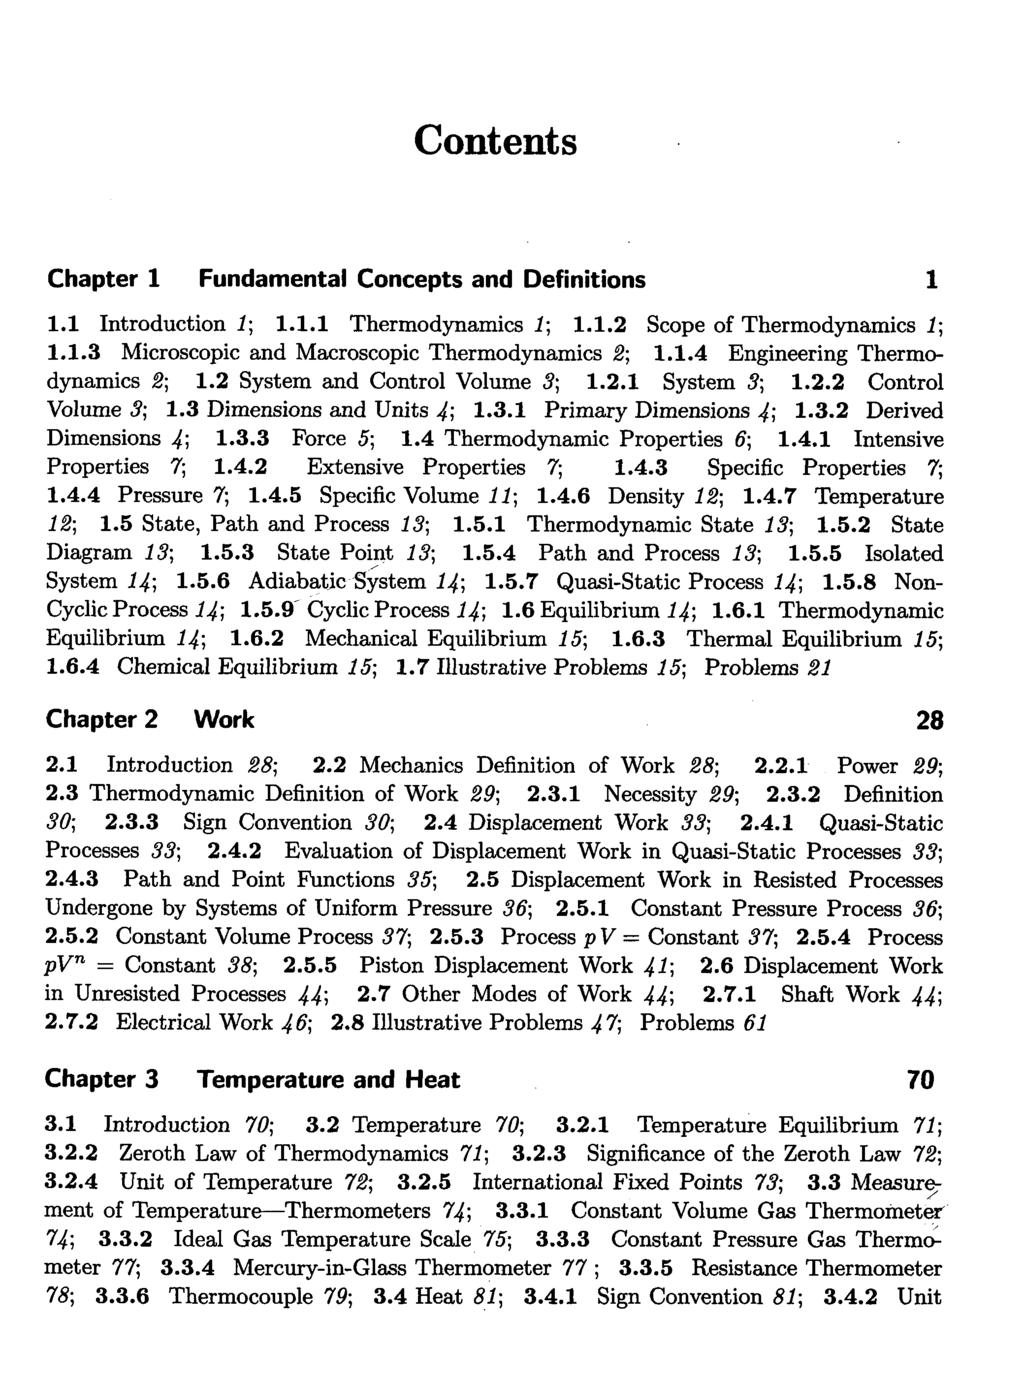 Constant Contents Chapter 1 Fundamental Concepts and Definitions 1 1.1 Introduction 1; 1.1.1 Thermodynamics 1; 1.1.2 Scope of Thermodynamics 1; 1.1.3 Microscopic and Macroscopic Thermodynamics 2; 1.1.4 Engineering Thermo dynamics 2; 1.